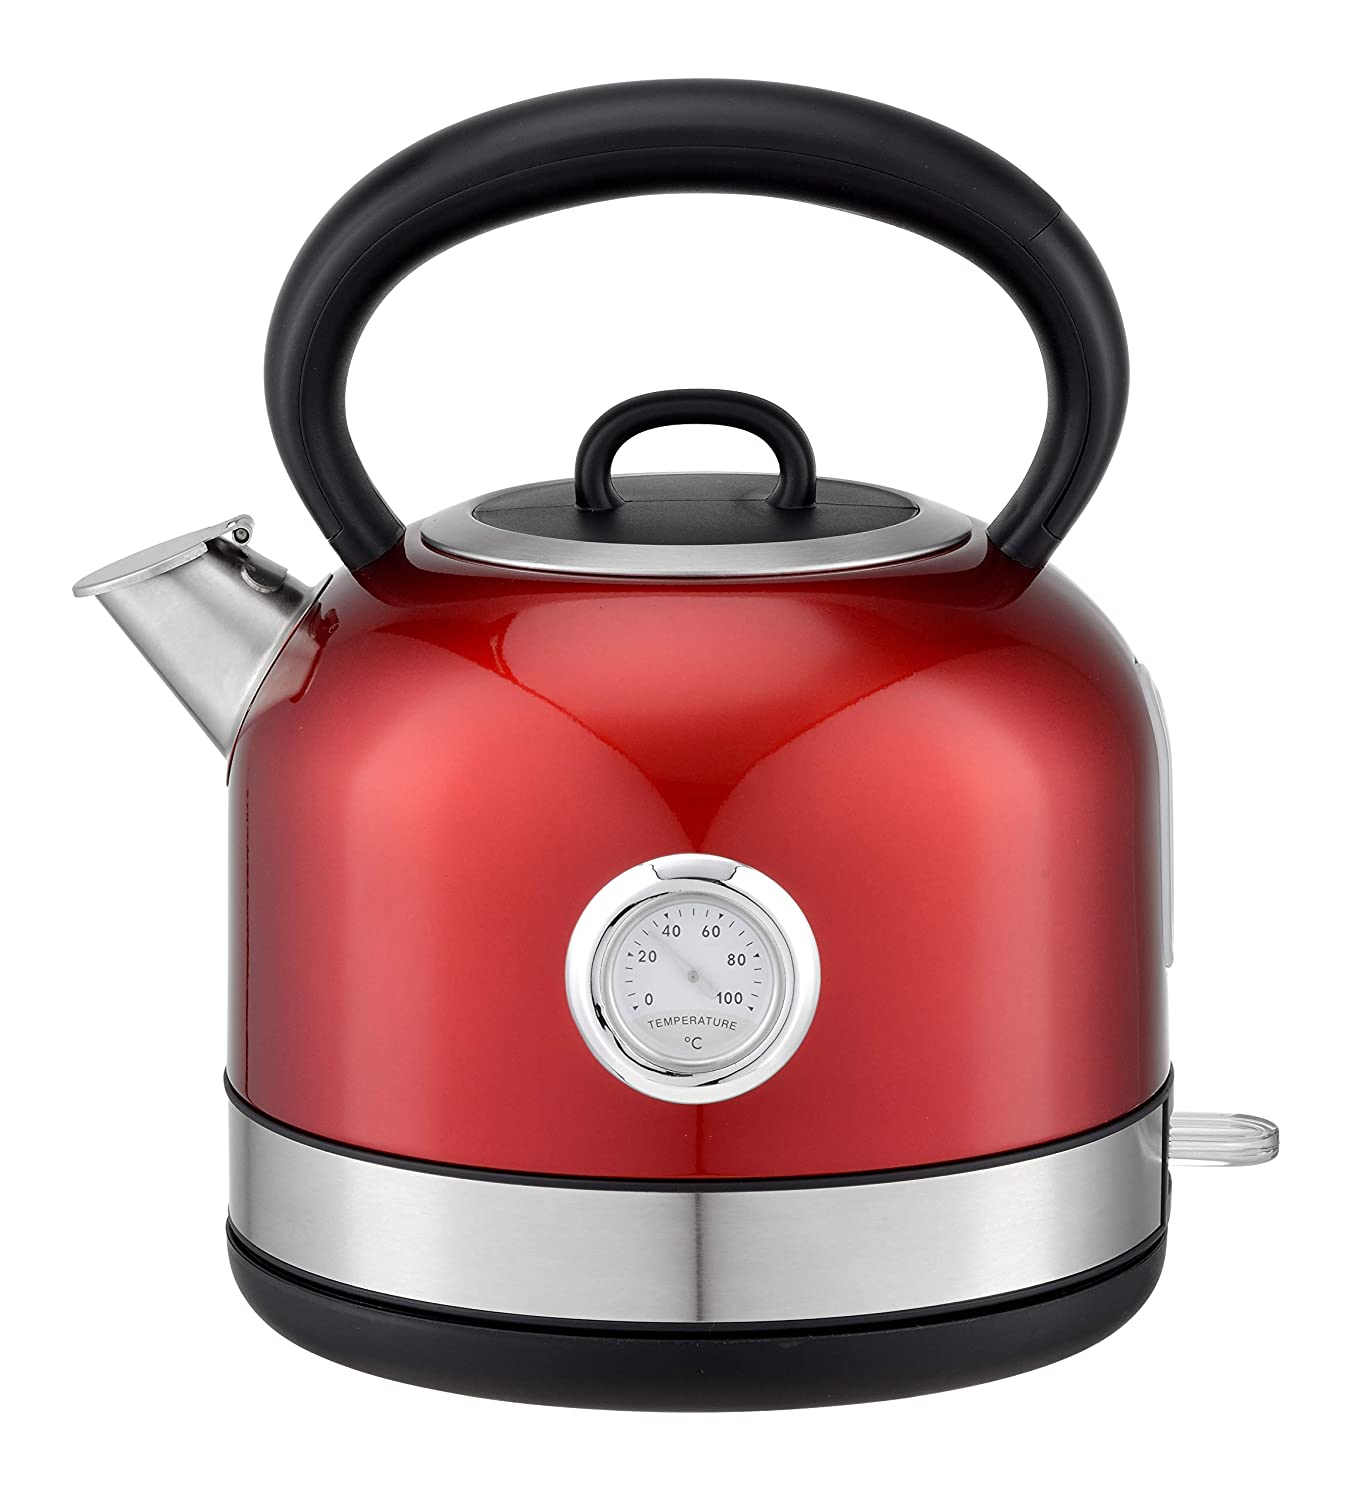 Hafele Dome Electric Stainless Steel Kettle with Analogue Temperature Display, 1.7 Litre, Red - Mahajan Electronics Online